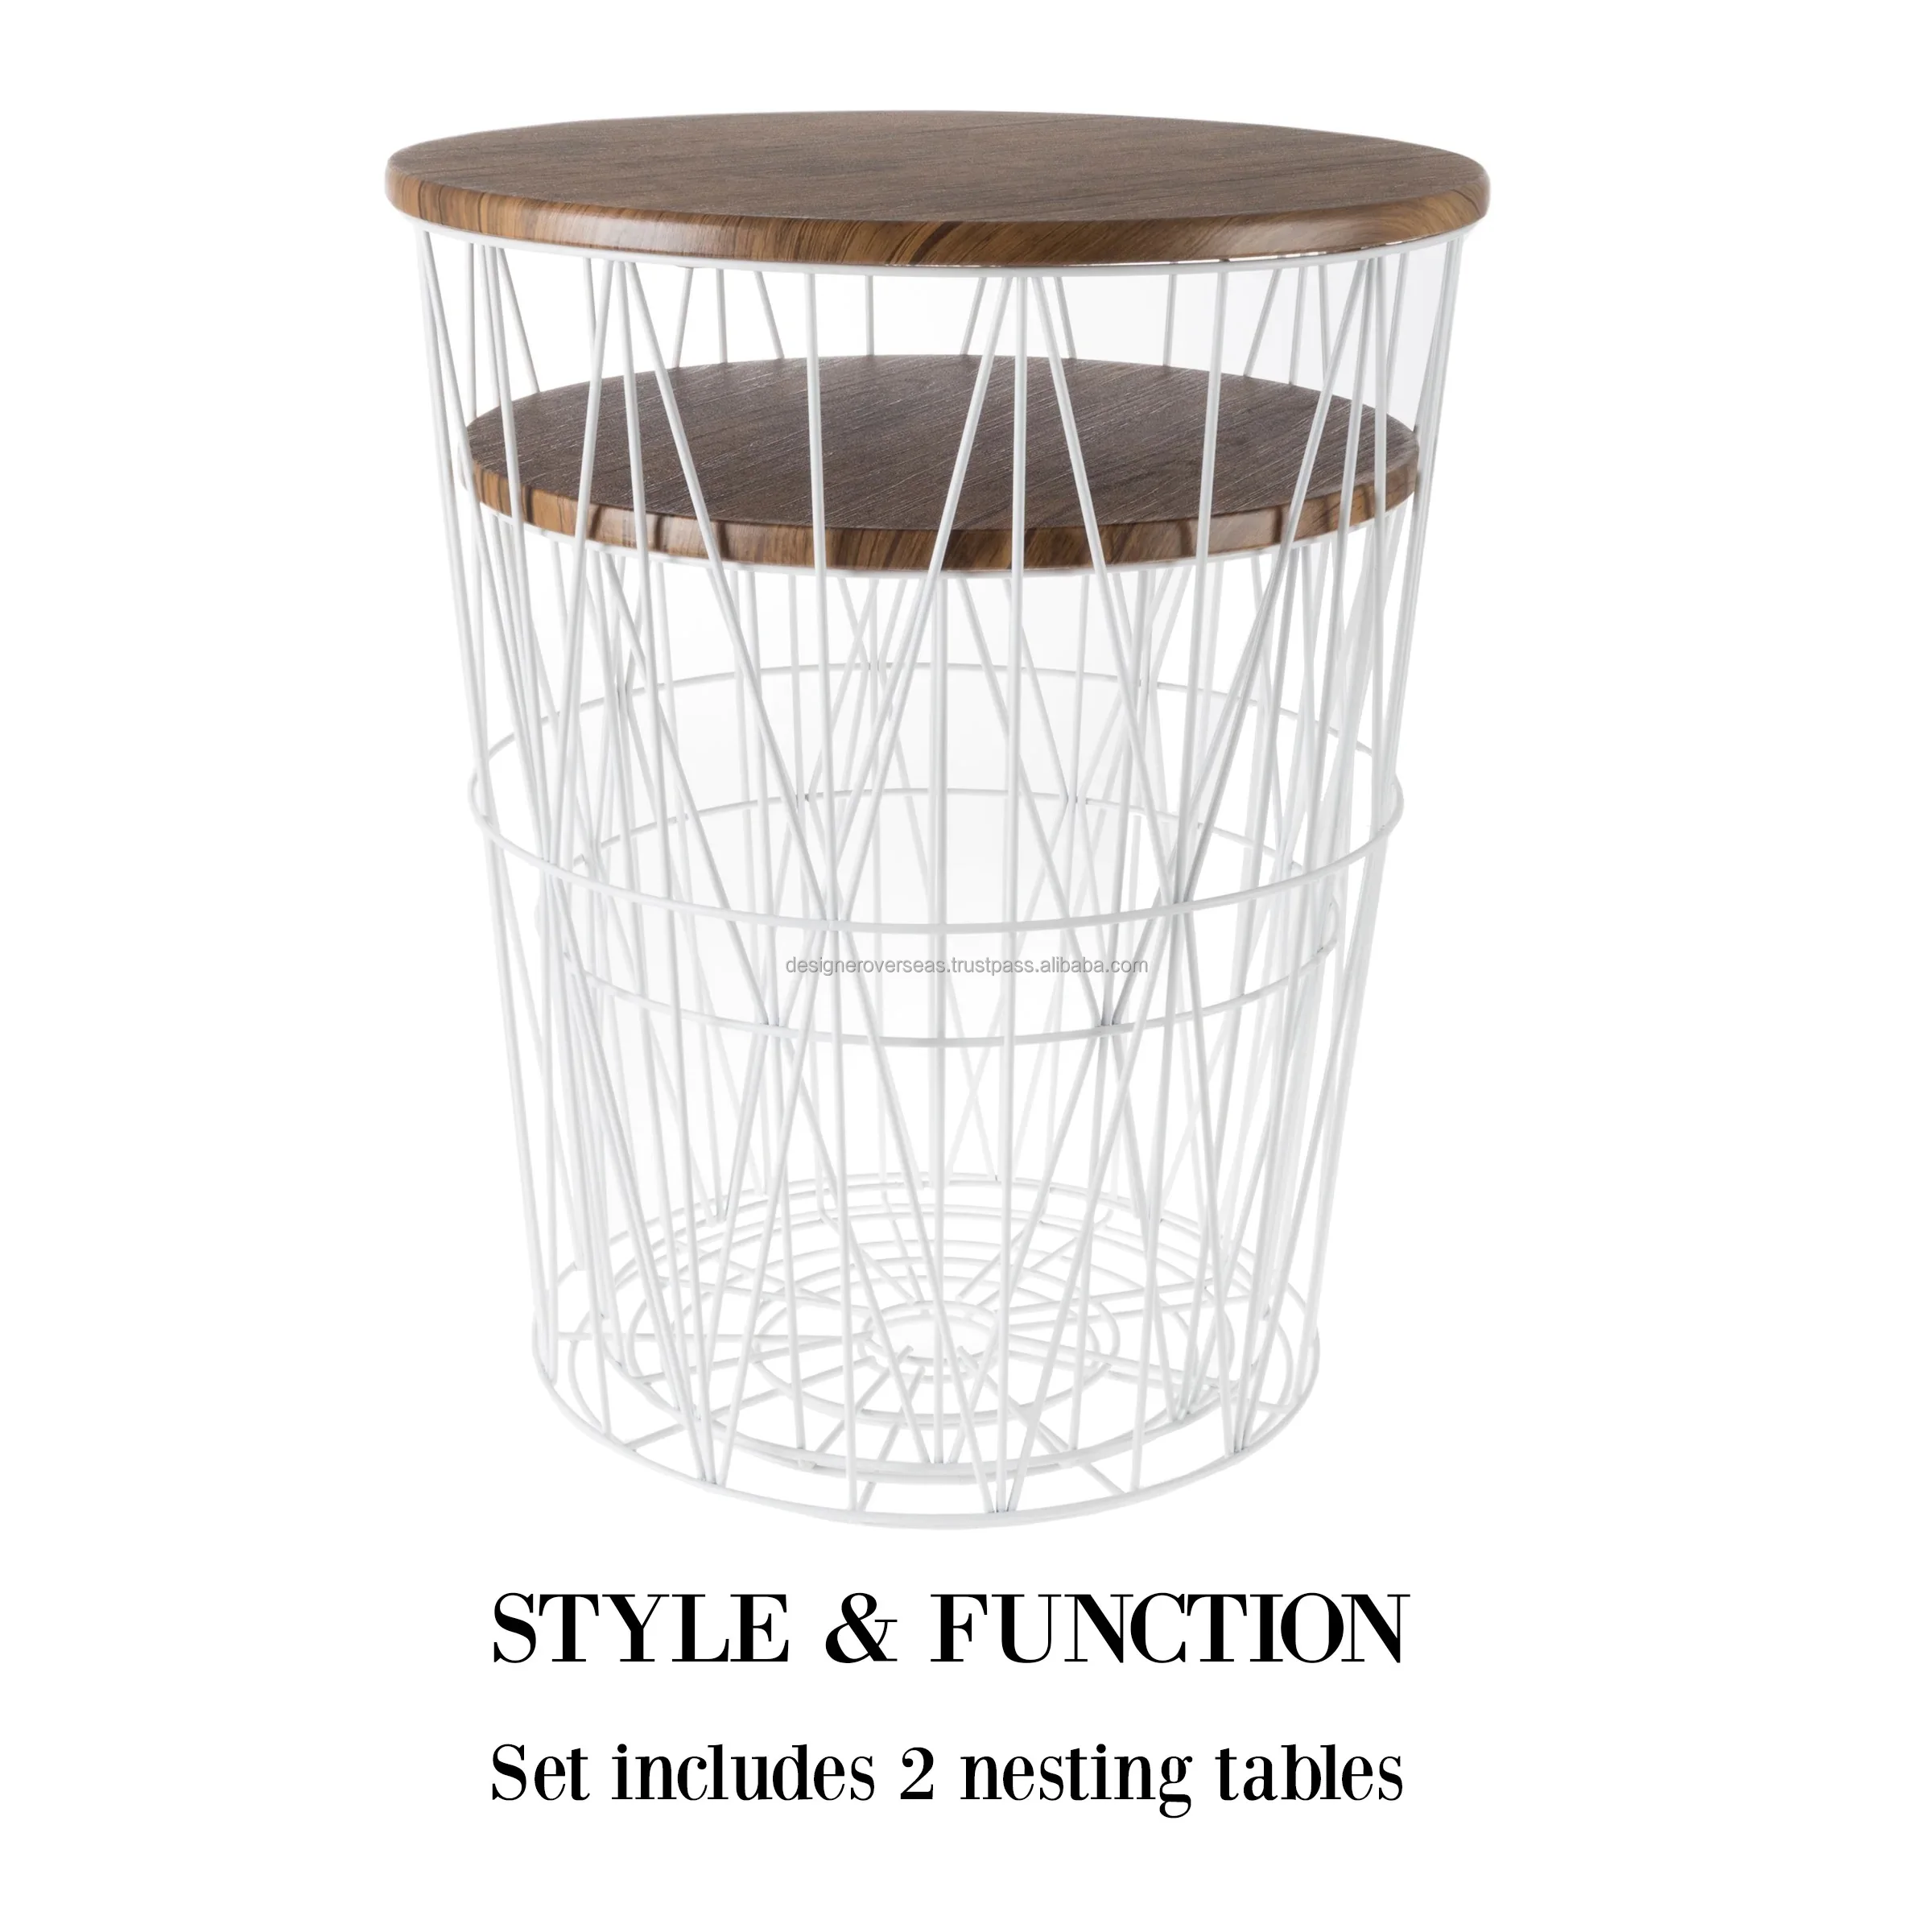 Crisscross Metal Framework Base with MDF Wood Tops Nesting End Tables with Additional Storage Set of 2 For Living Room Furniture